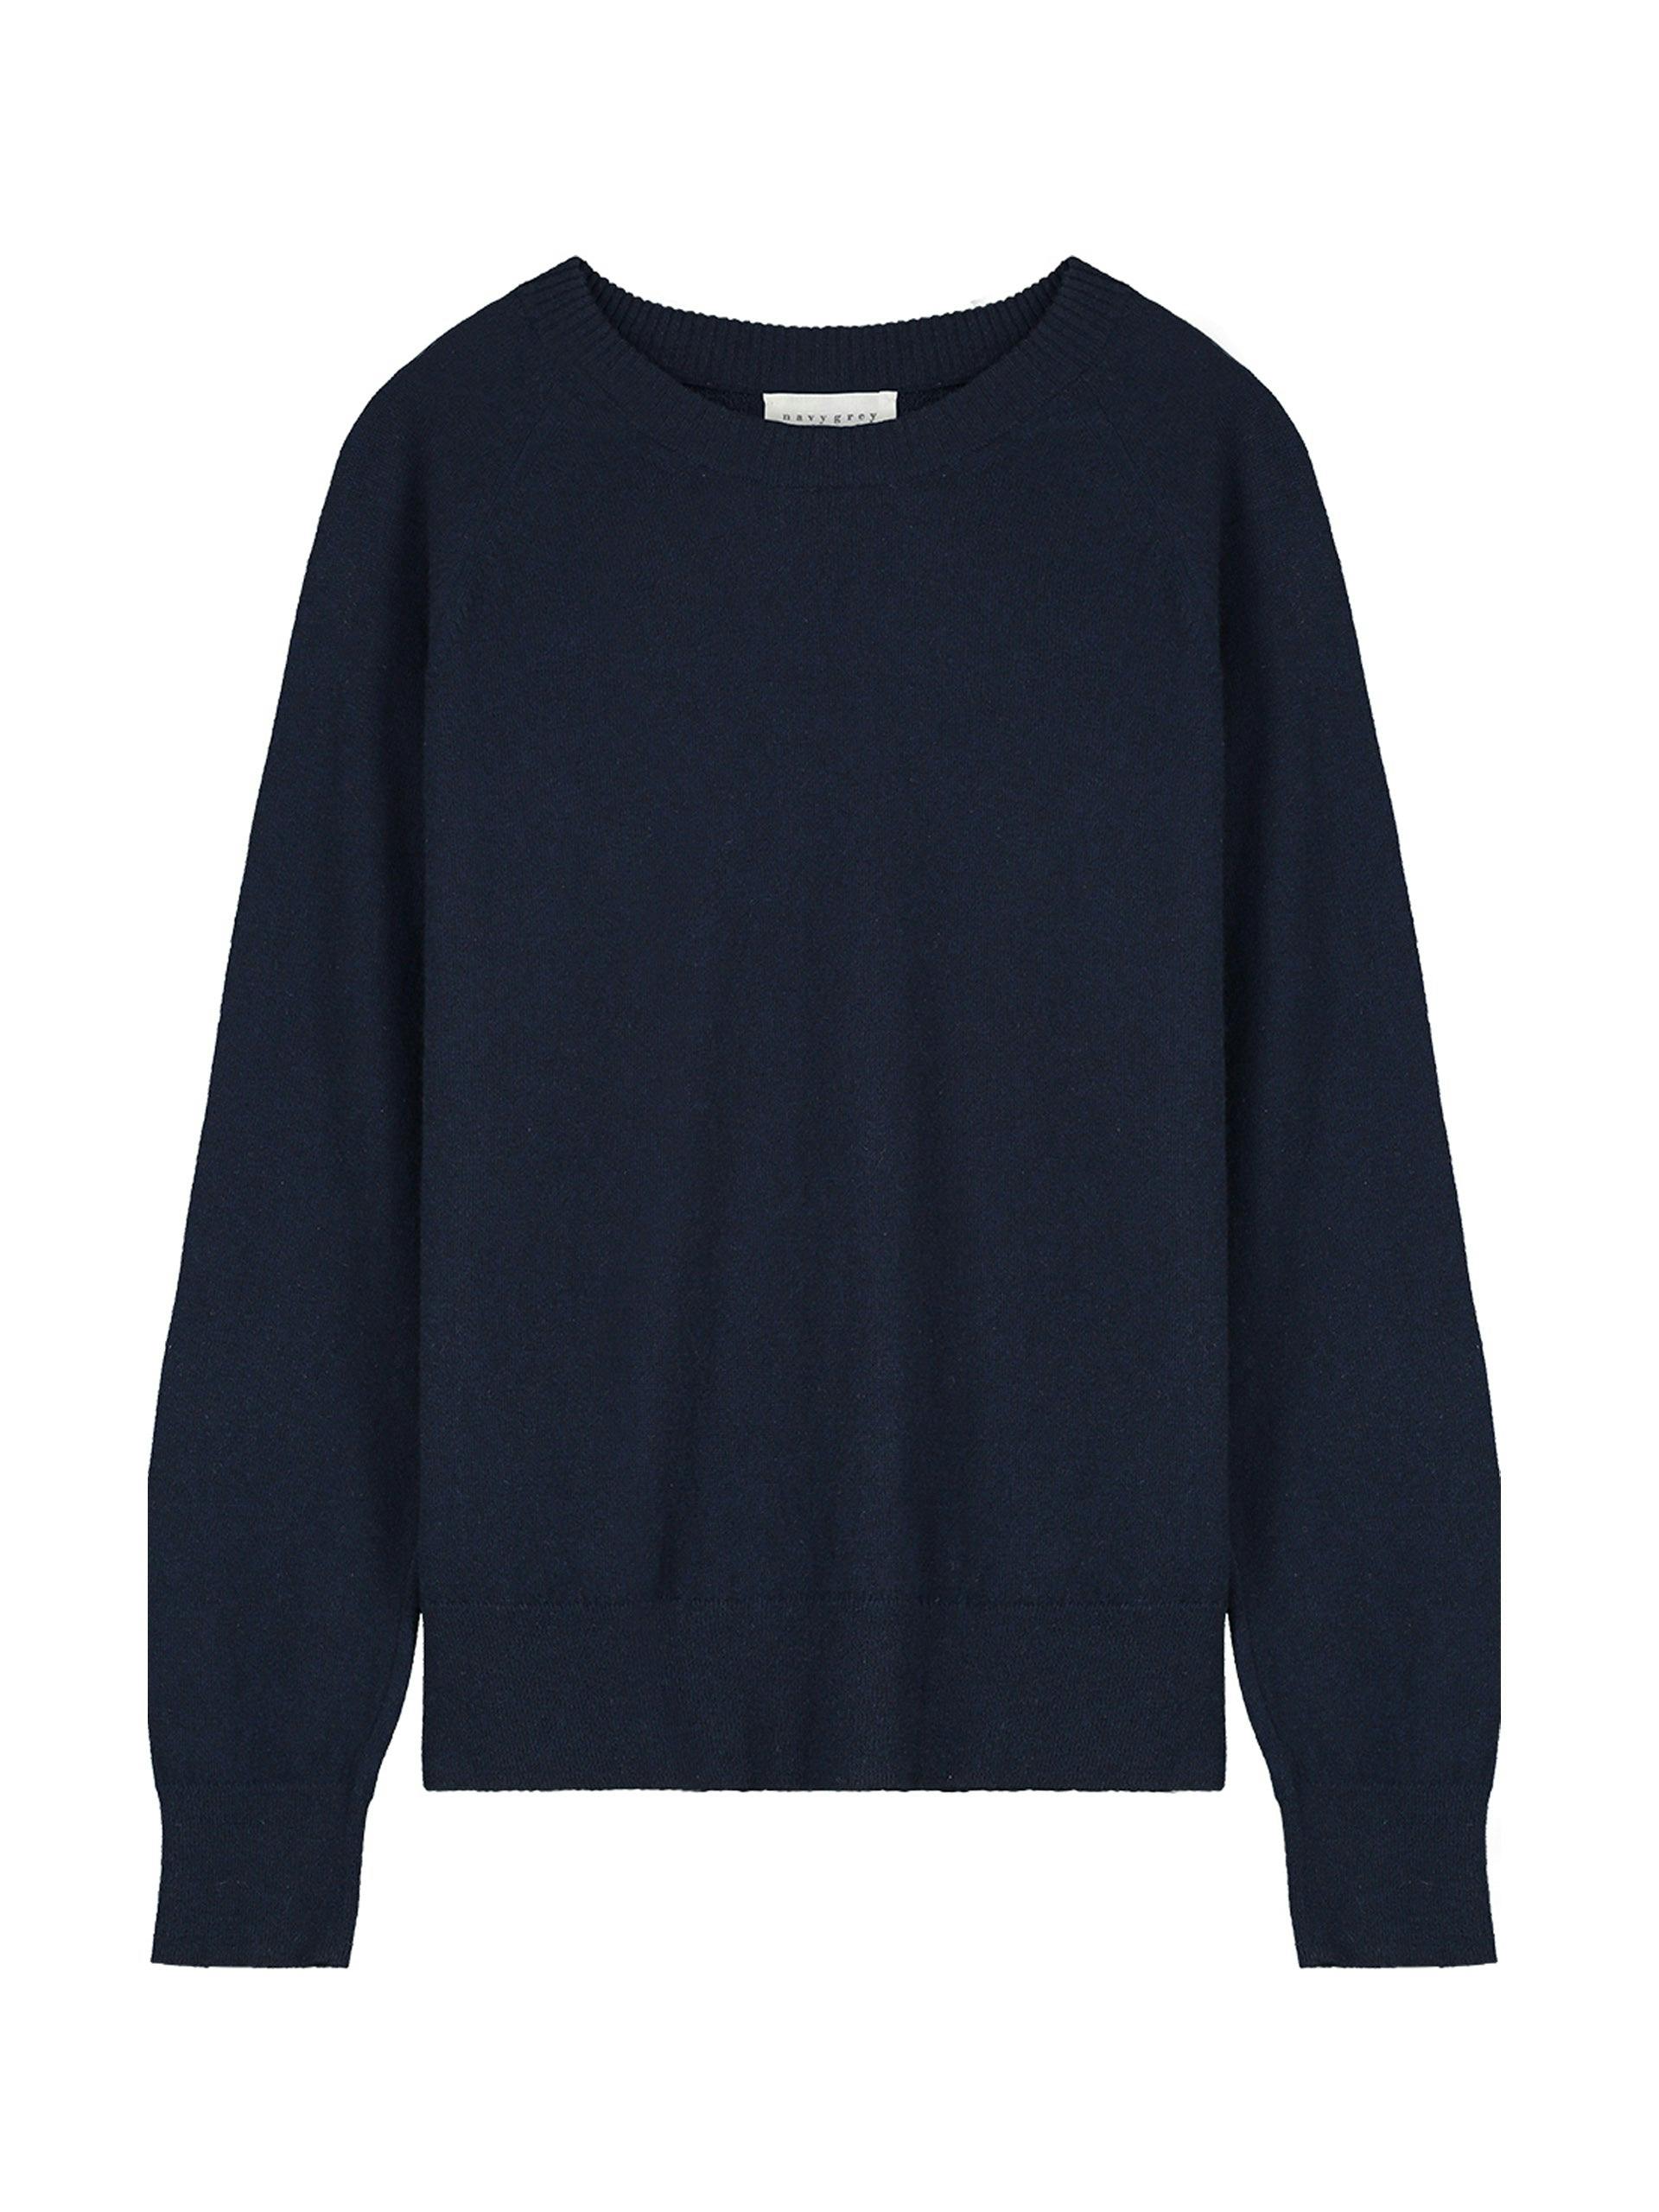 The Weekend knit in navy